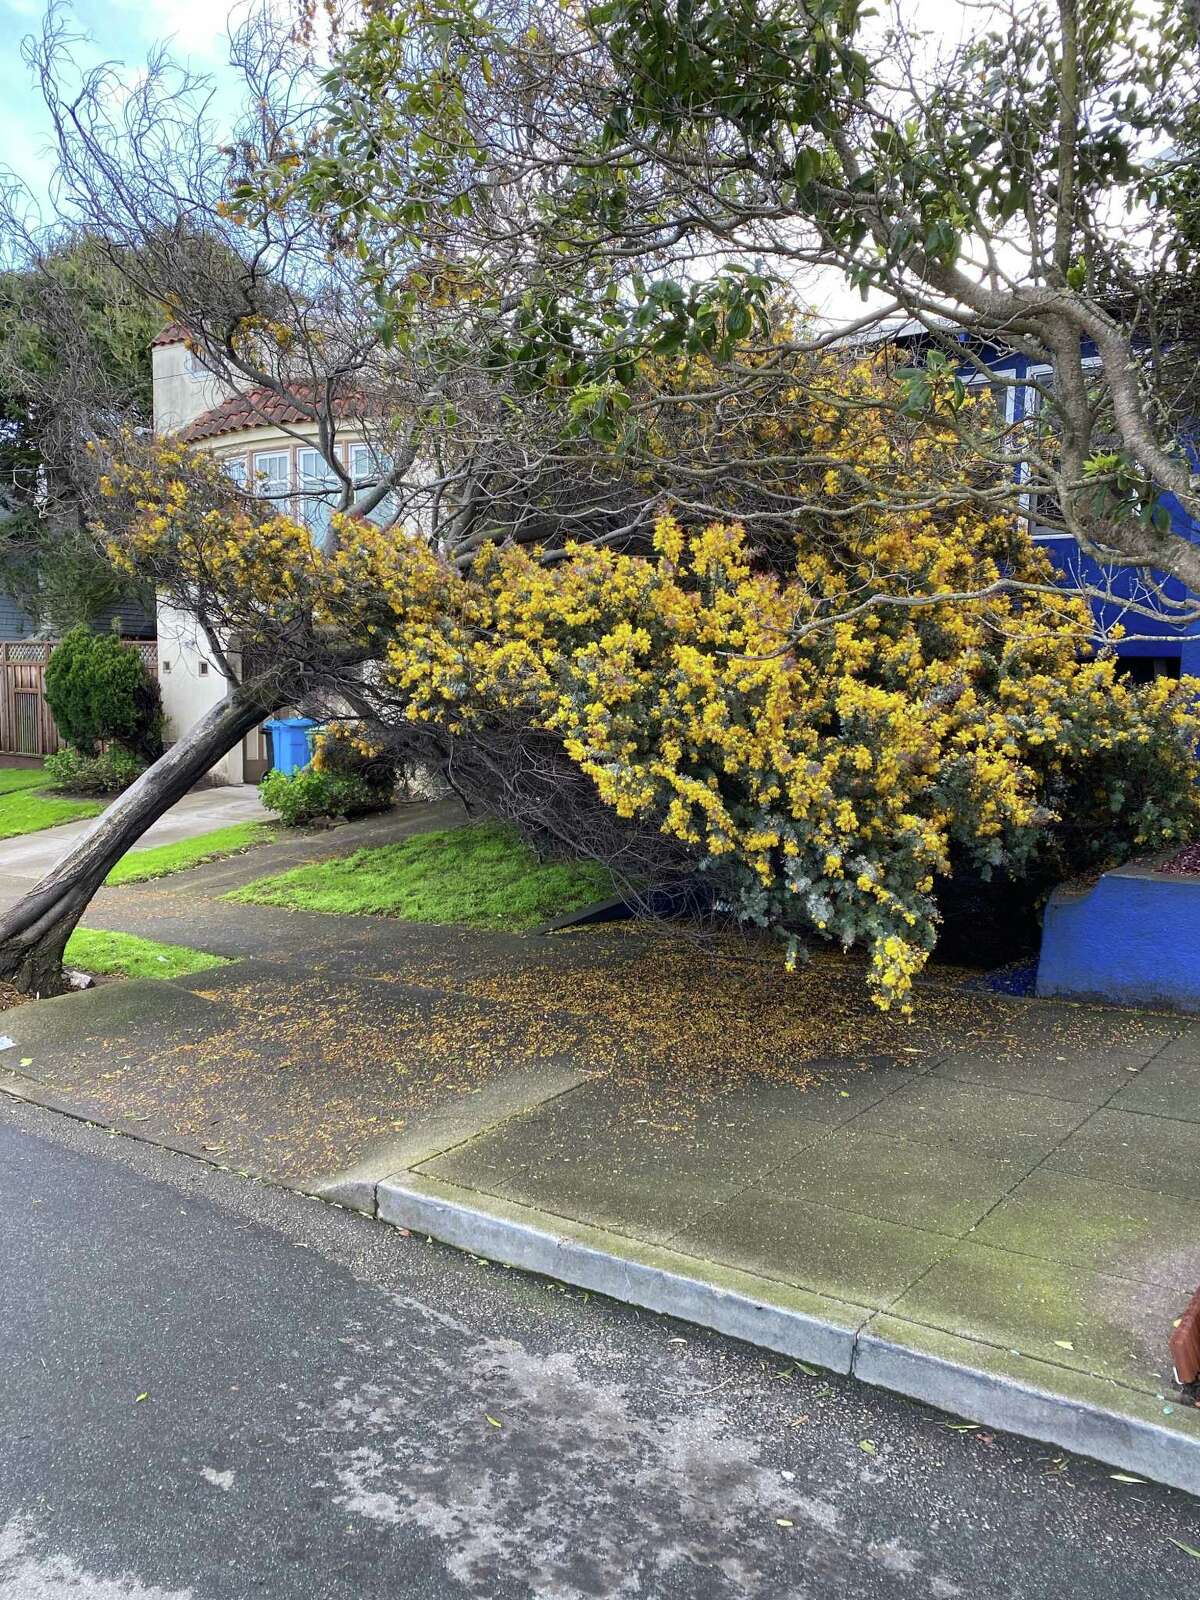 An acacia tree toppled in the storms earlier this month in front of Kevin Fisher-Paulson’s home.